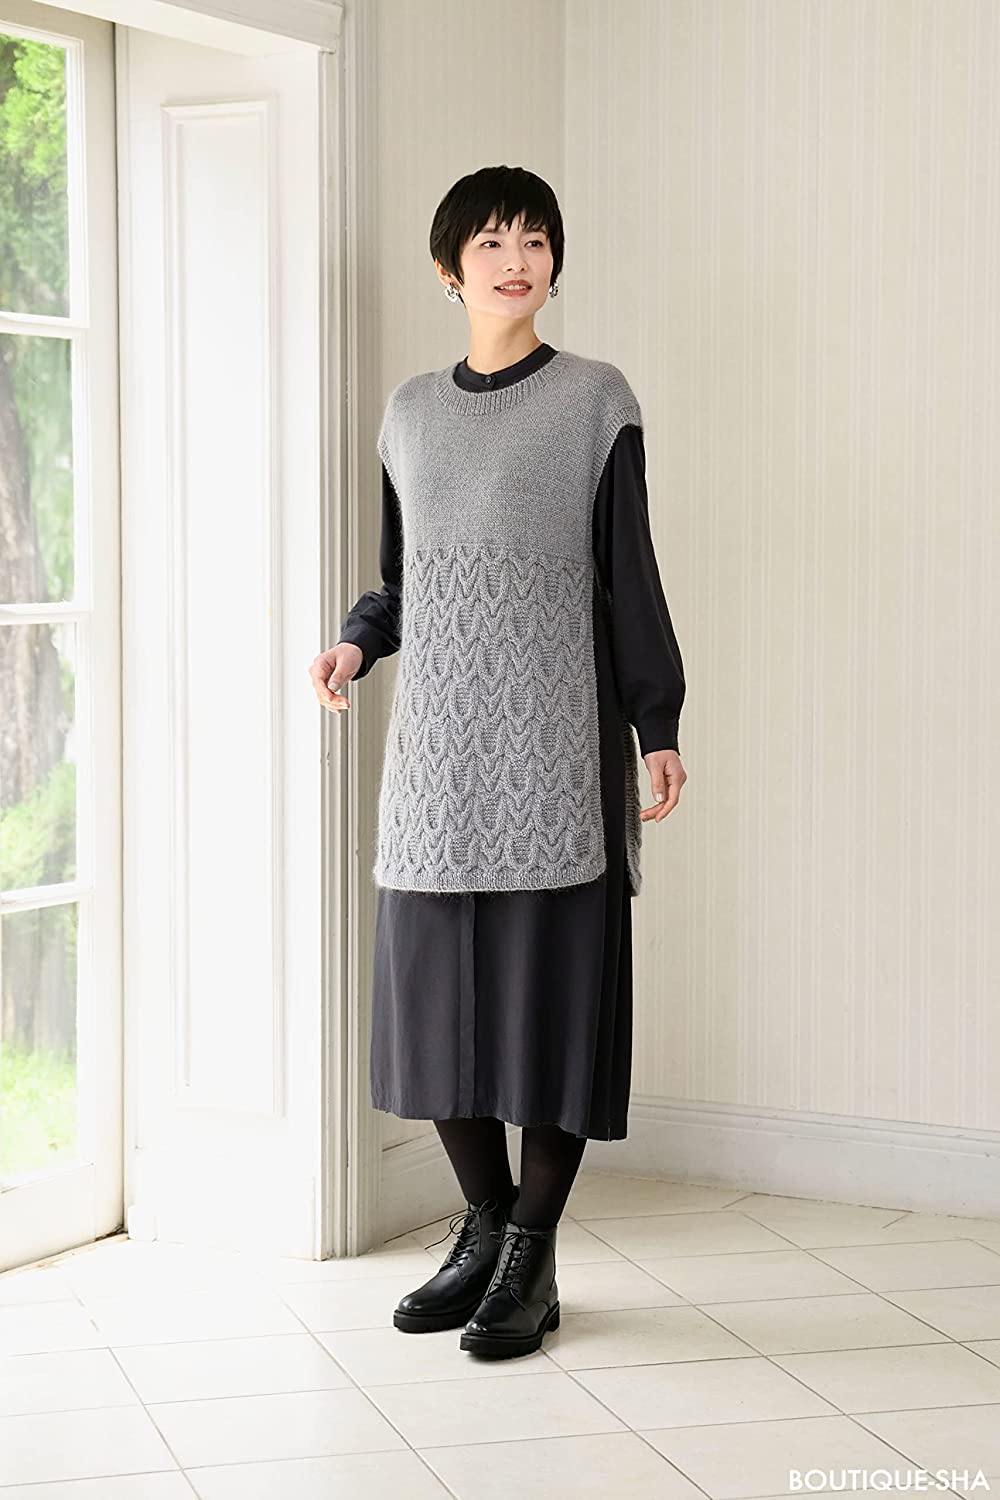 Fall/Winter*Mrs Hand Knitting Collection 32 (Lady Boutique Series)